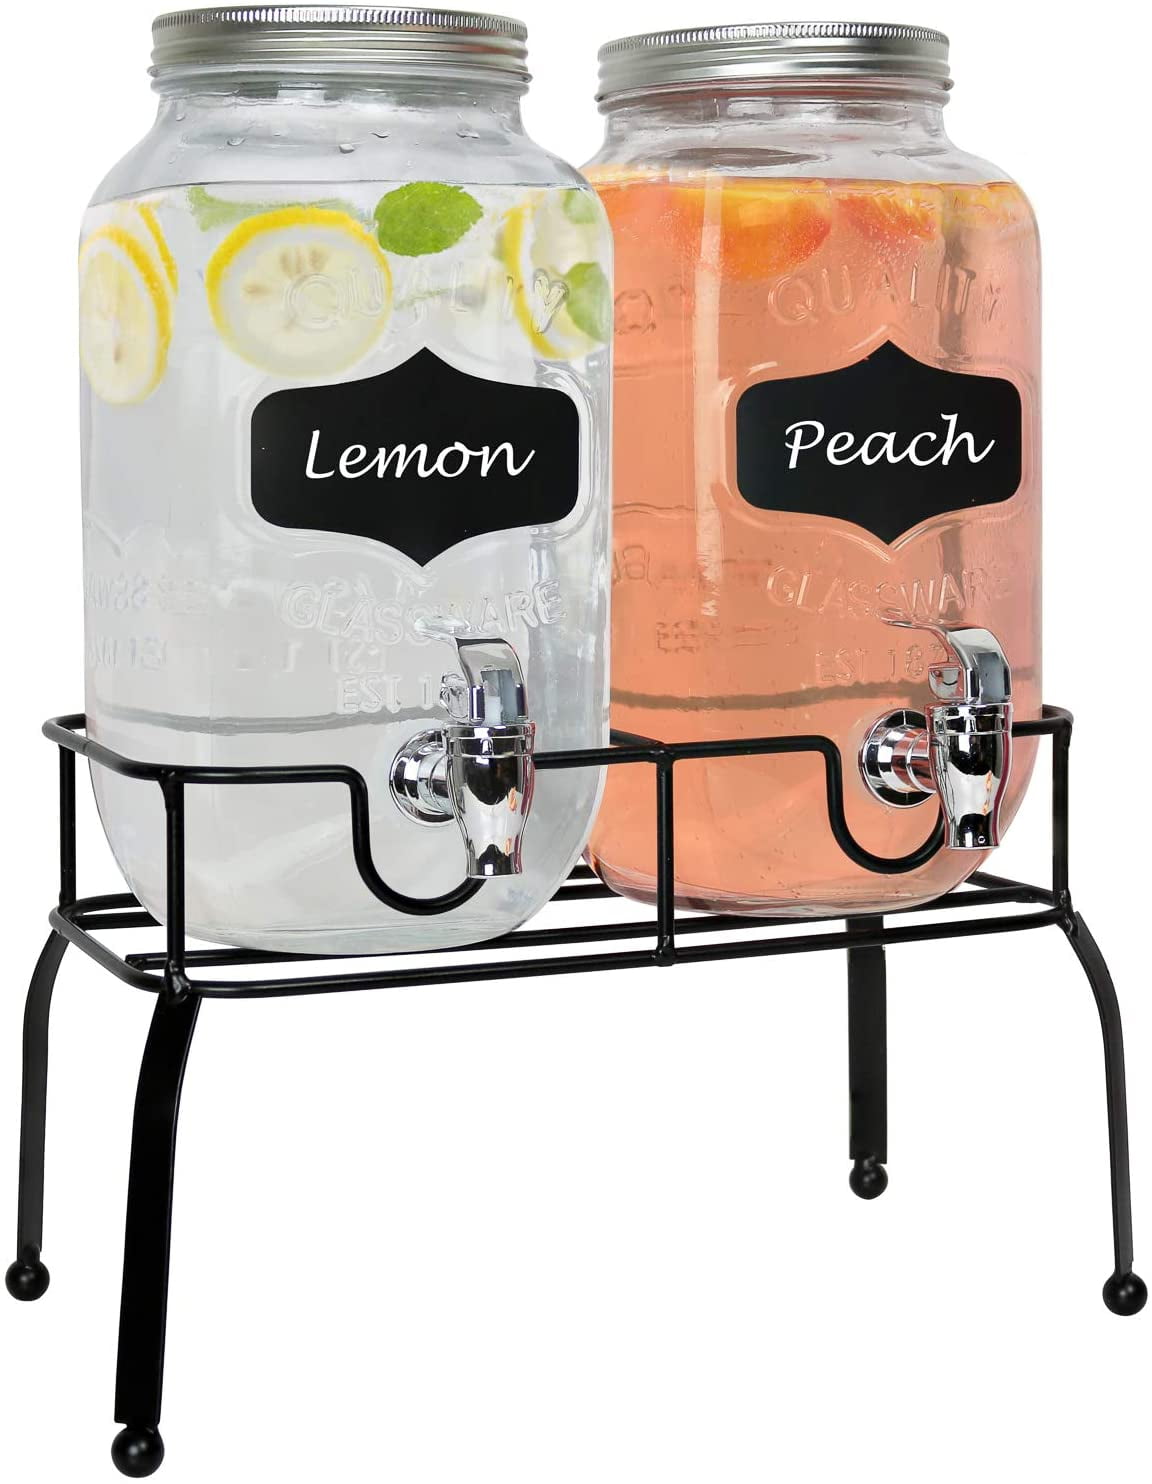 Dual 1.5 Gallon Glass Beverage Dispensers with Decorative Metal Stand, Stainless